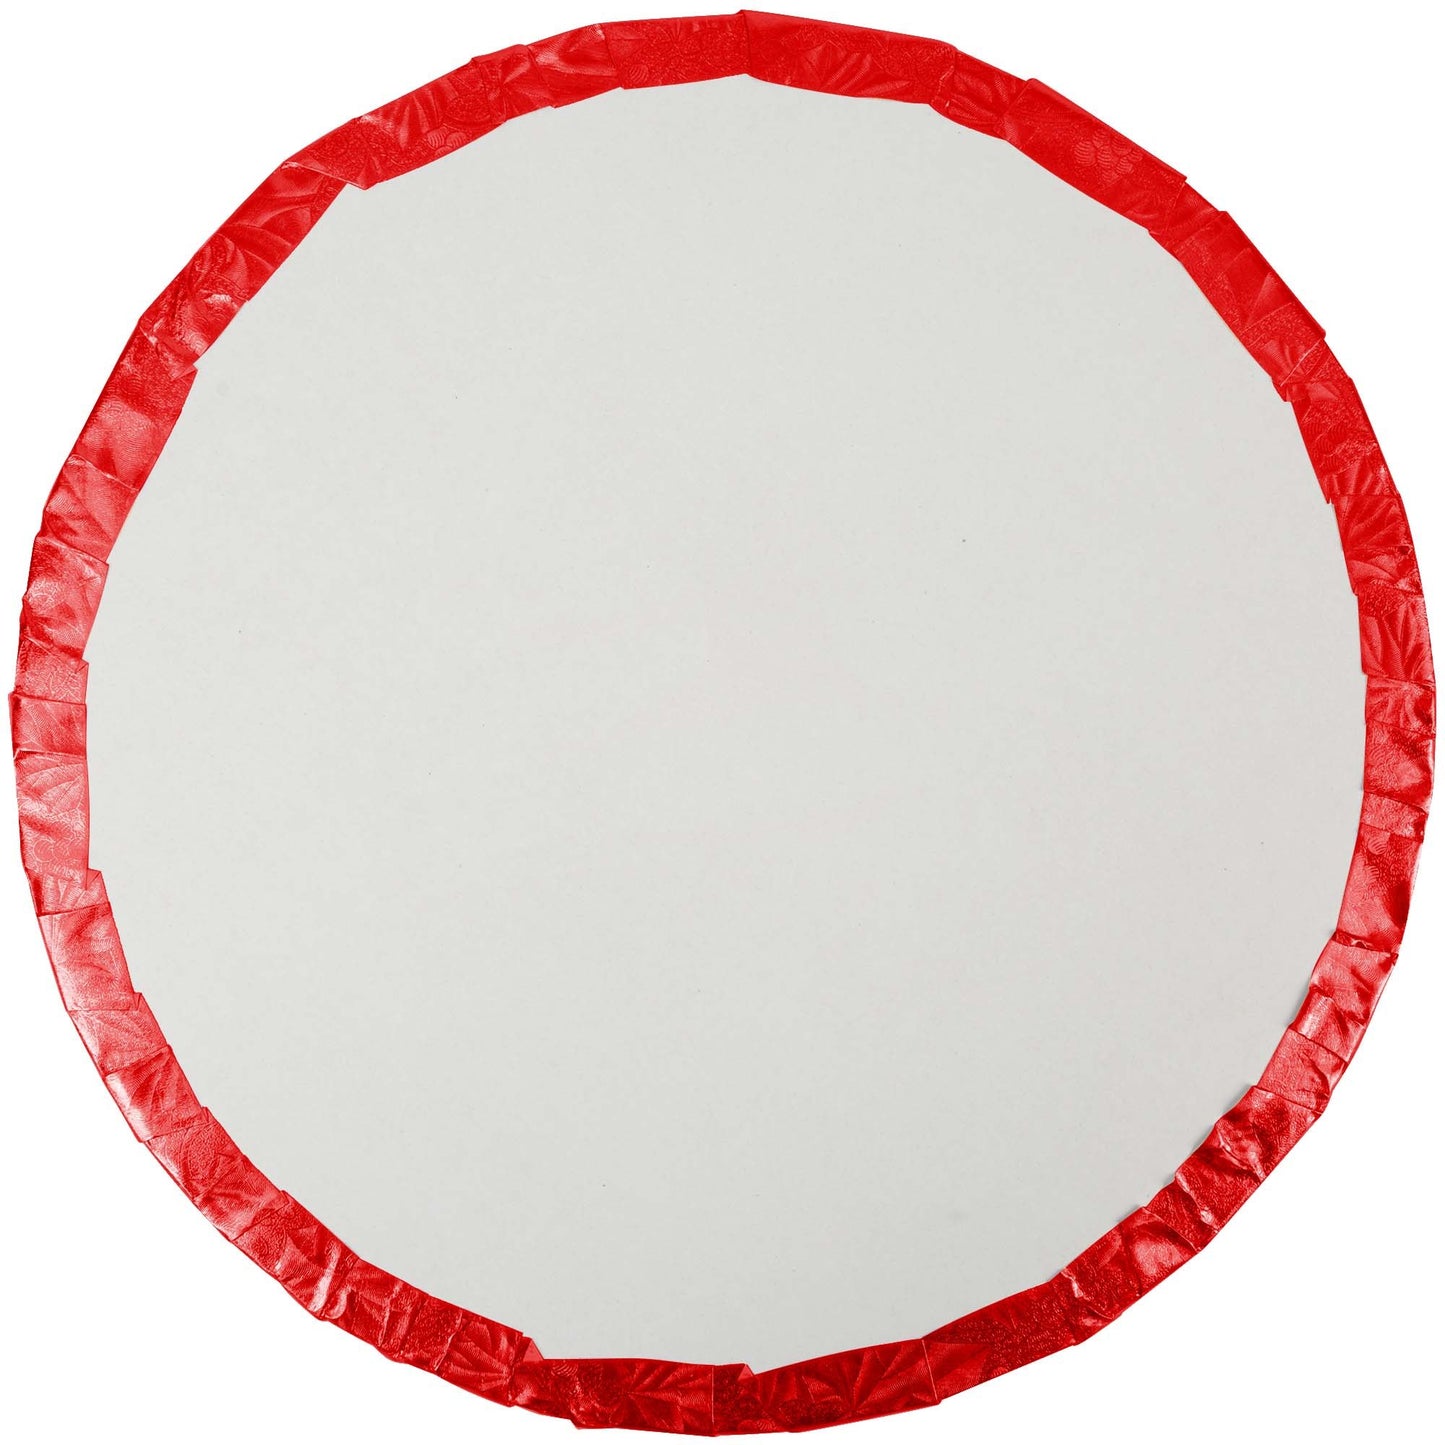 image of the back of a 10 inch round red cake drum that is 1/2 thick